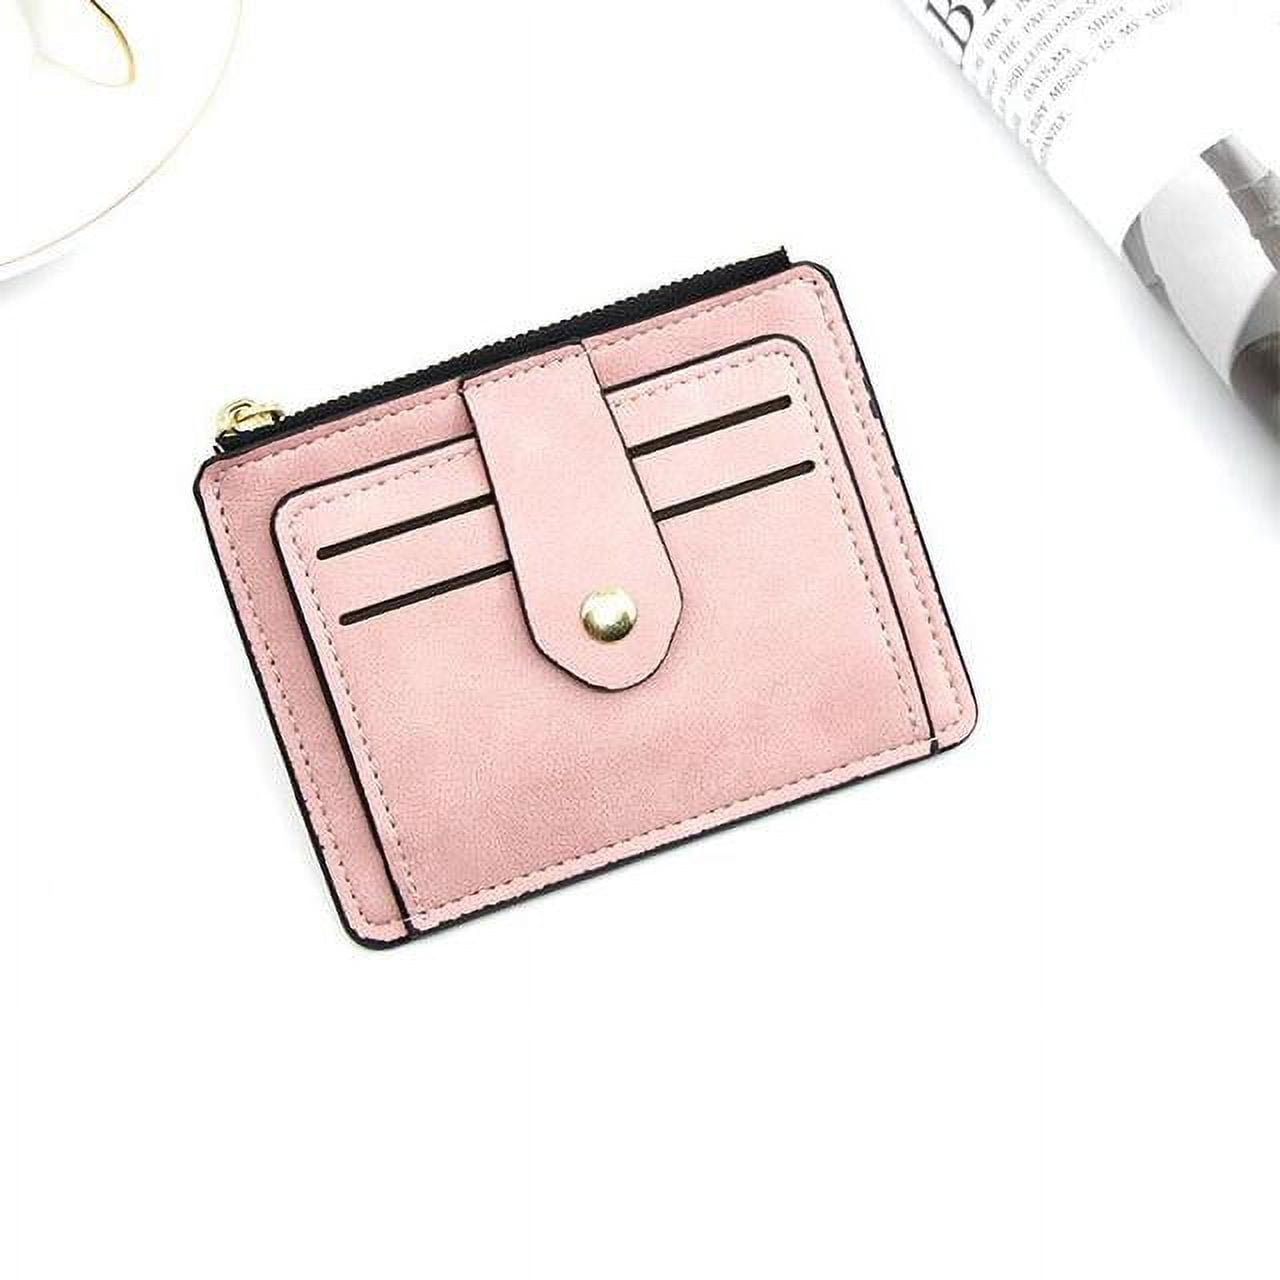 Luxury Small Men 39 s Credit ID Card Holder Wallet Male Slim Leather Wallet with Coin Pocket Brand Designer Purse for Men Women 35ae08c3 a03d 4e40 ae19 410290e9064f.071a6a5c8c60551ba183681391d9895c